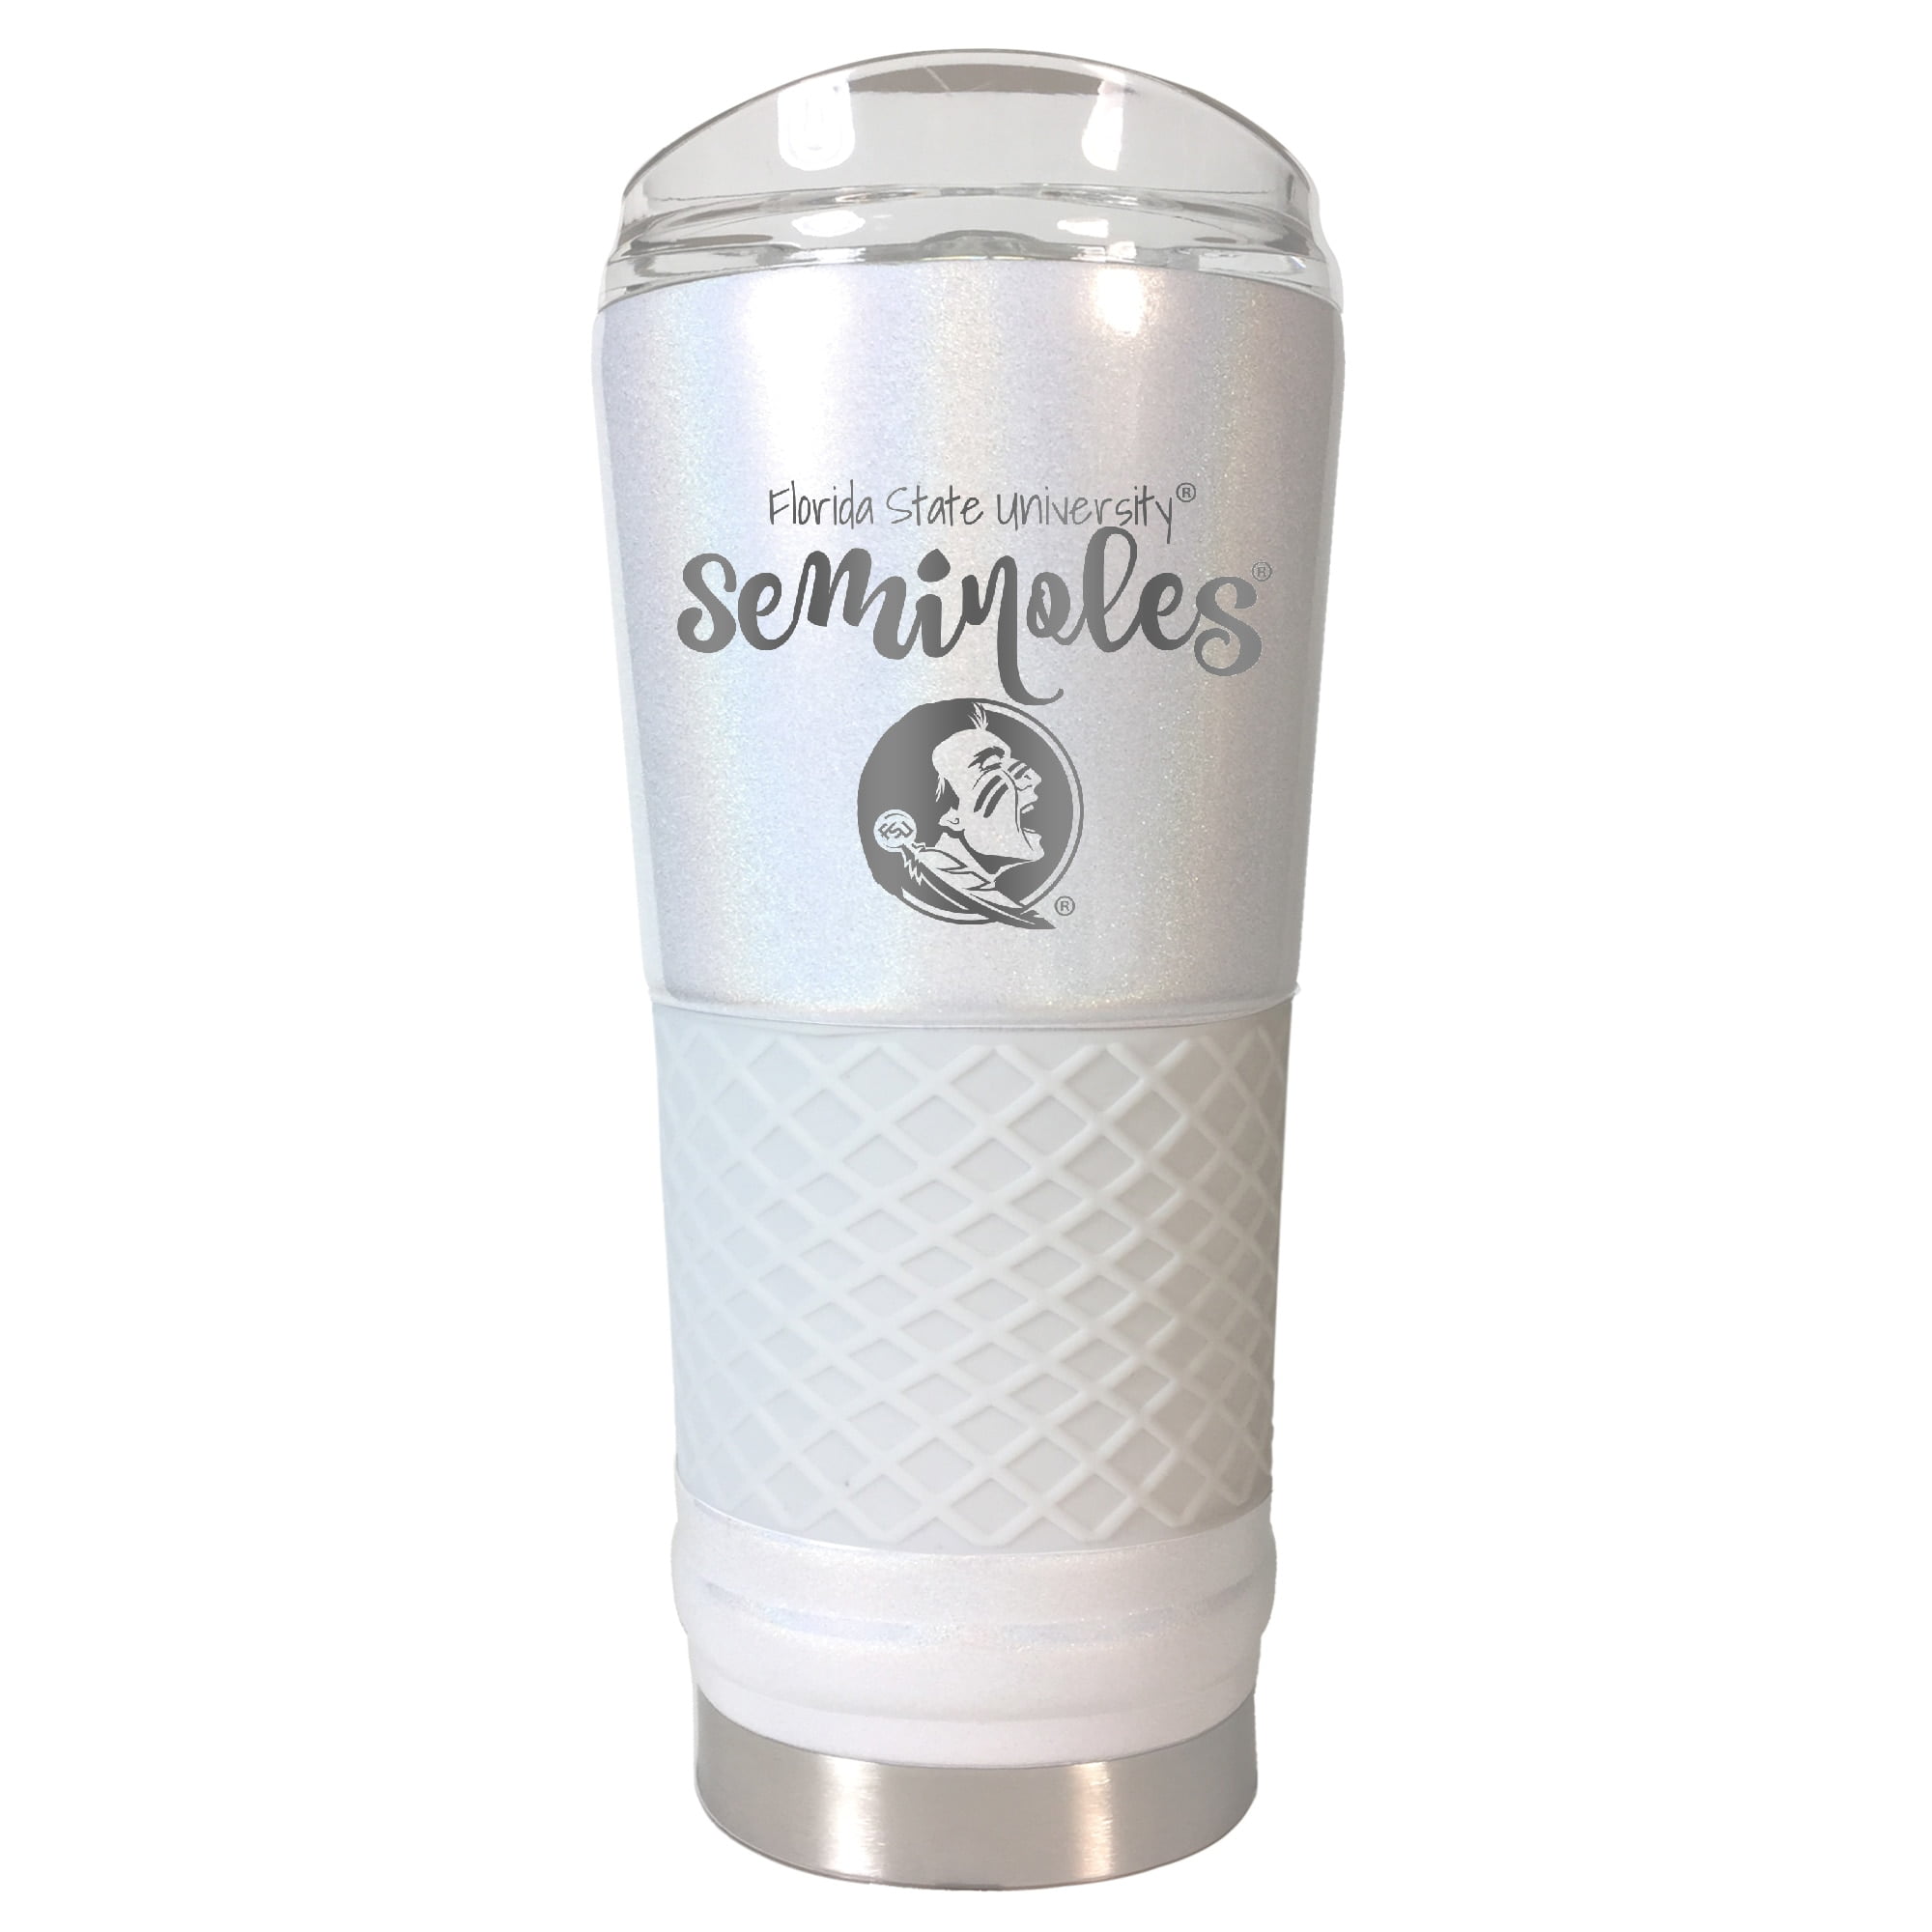 Florida State University Seminoles 7 ounce Stainless Steel Flask 